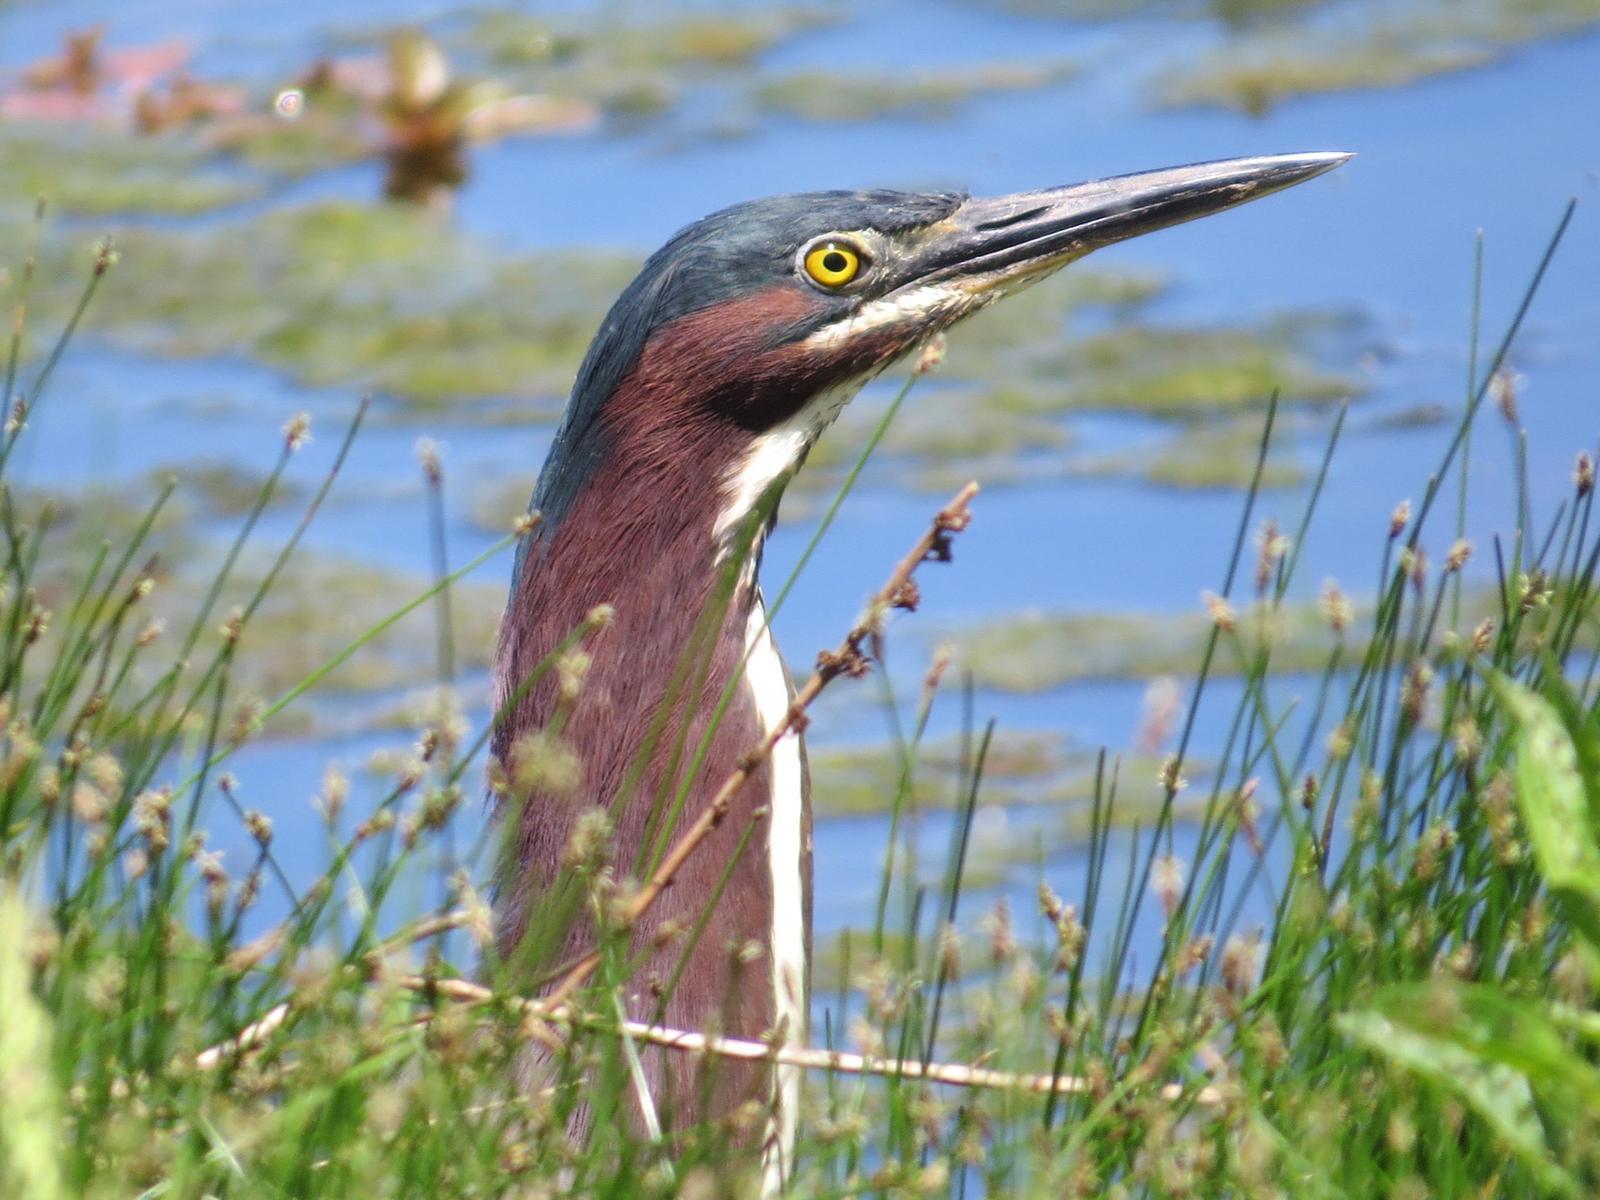 Green Heron Photo by Kathy Wooding